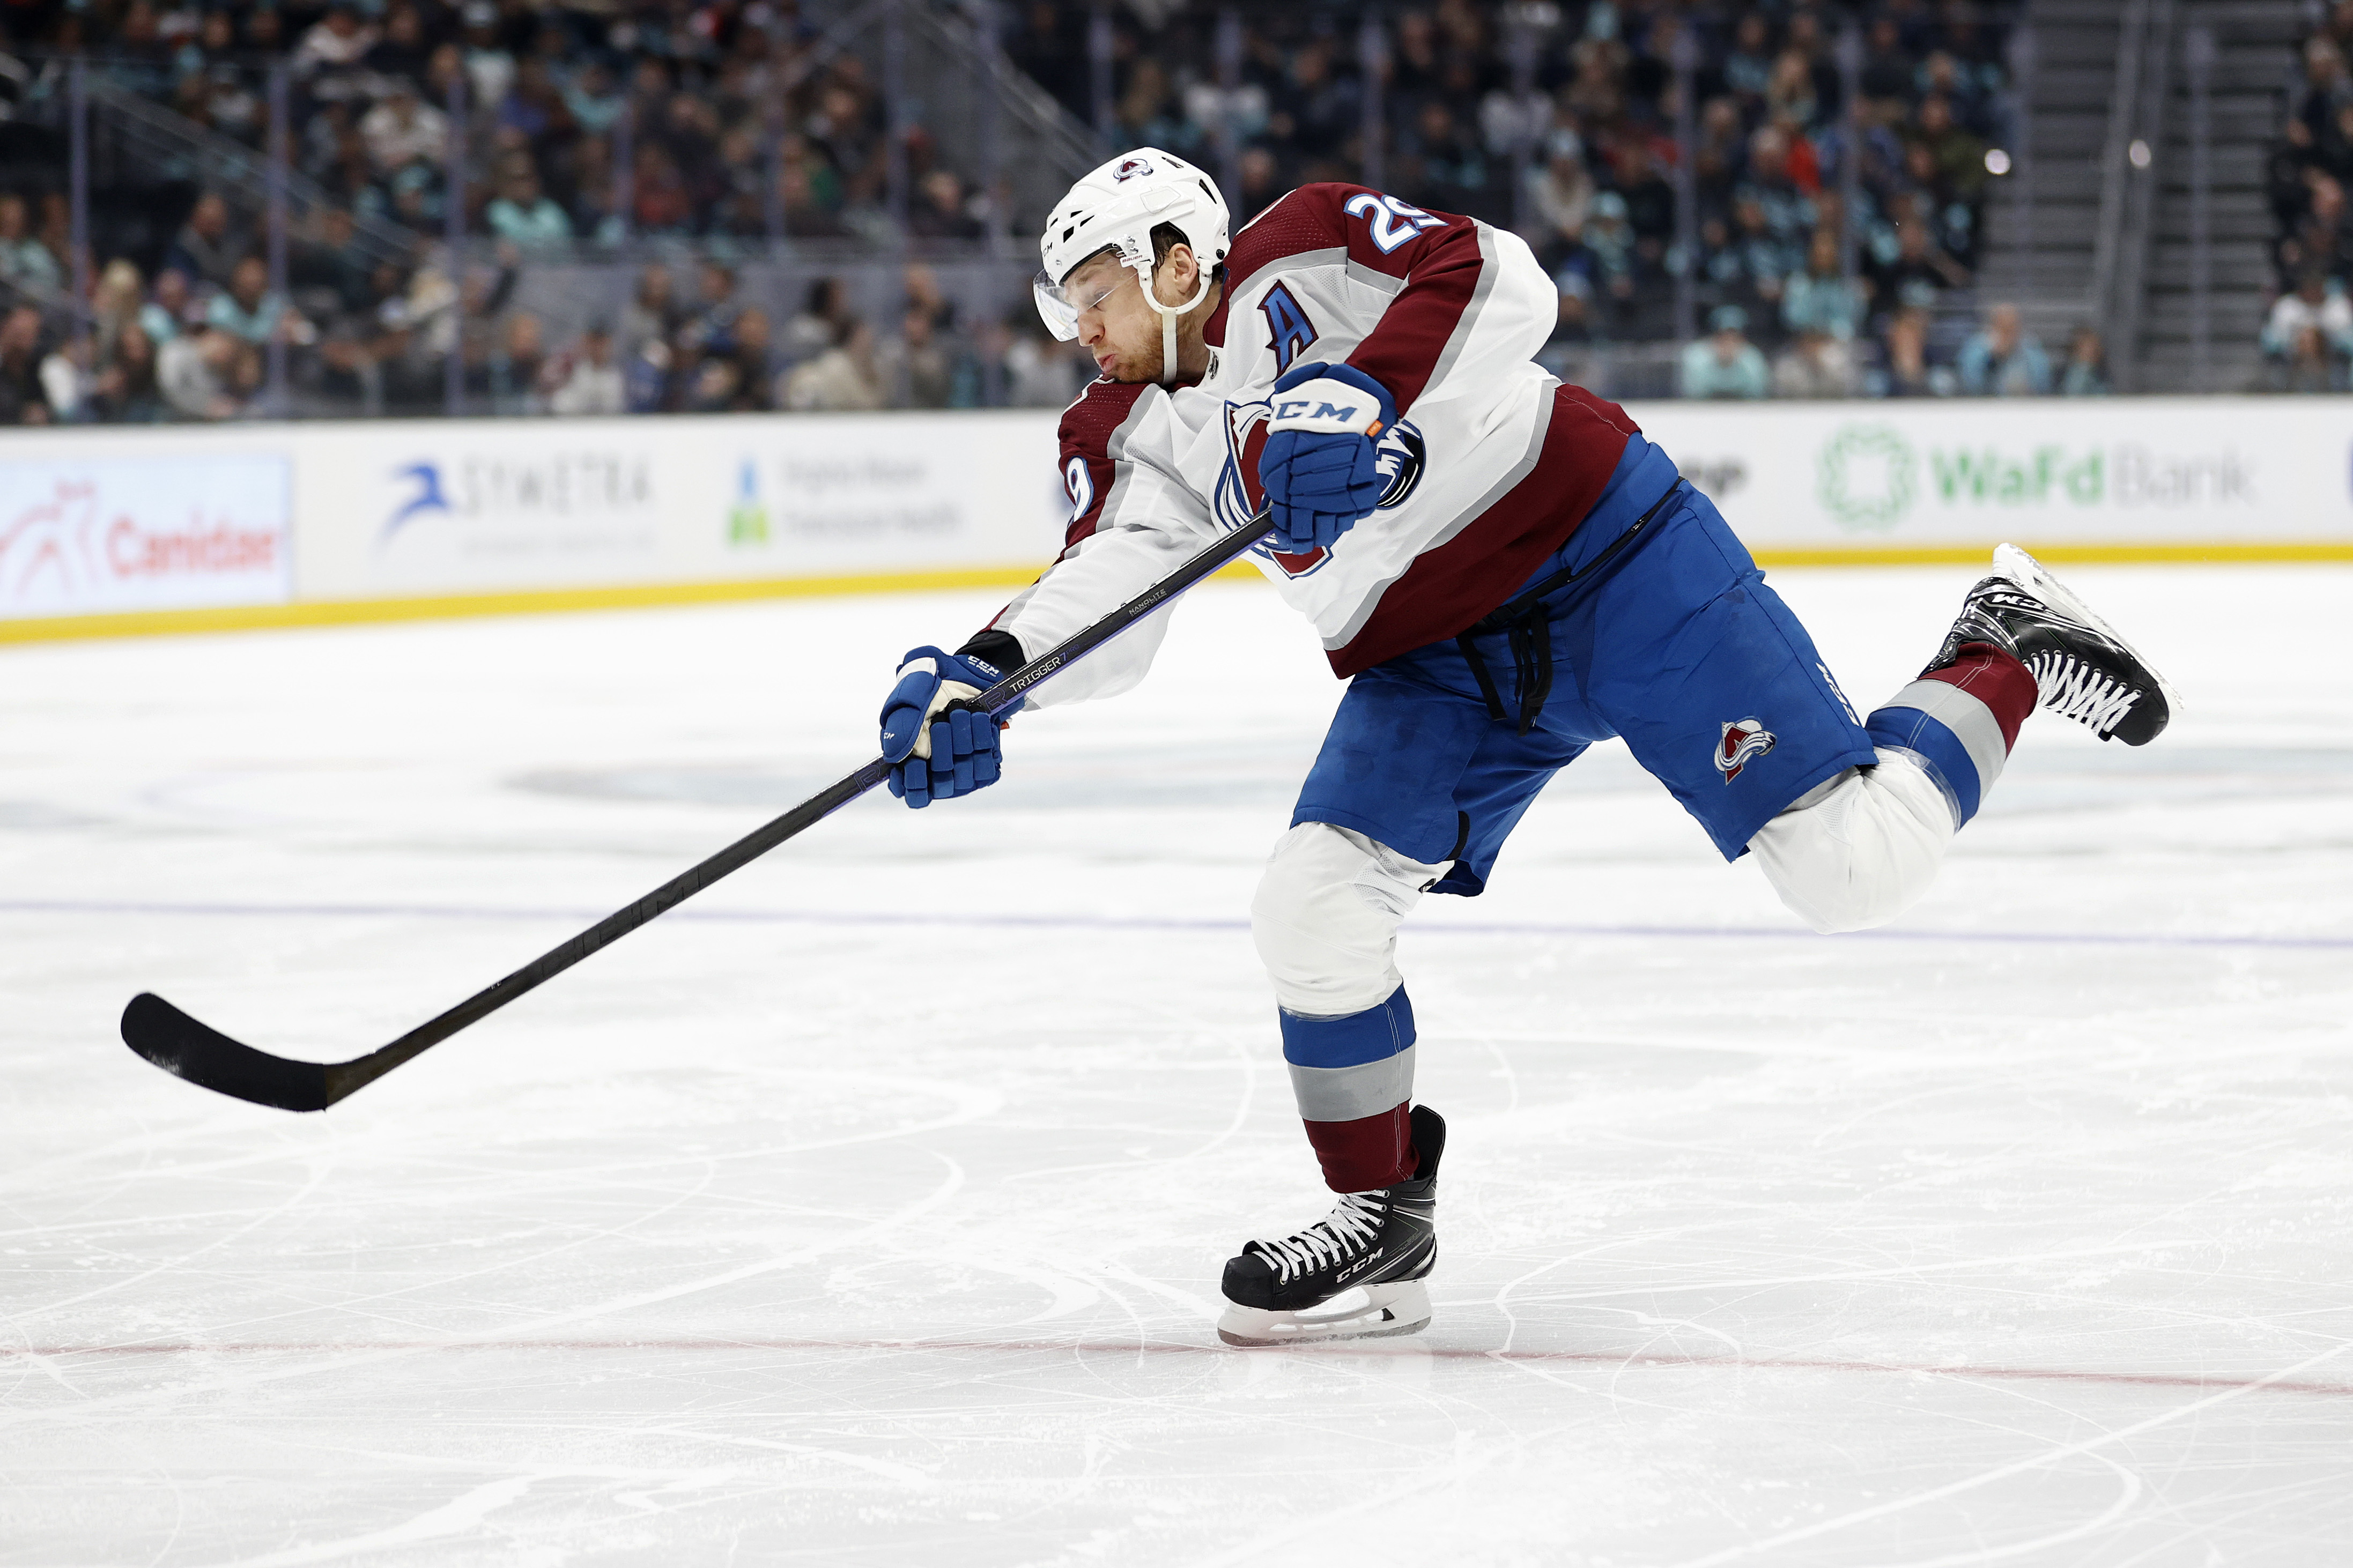 Nathan MacKinnon of the Colorado Avalanche shoots against the Seattle Kraken during the first period at Climate Pledge Arena on January 21, 2023 in Seattle, Washington.